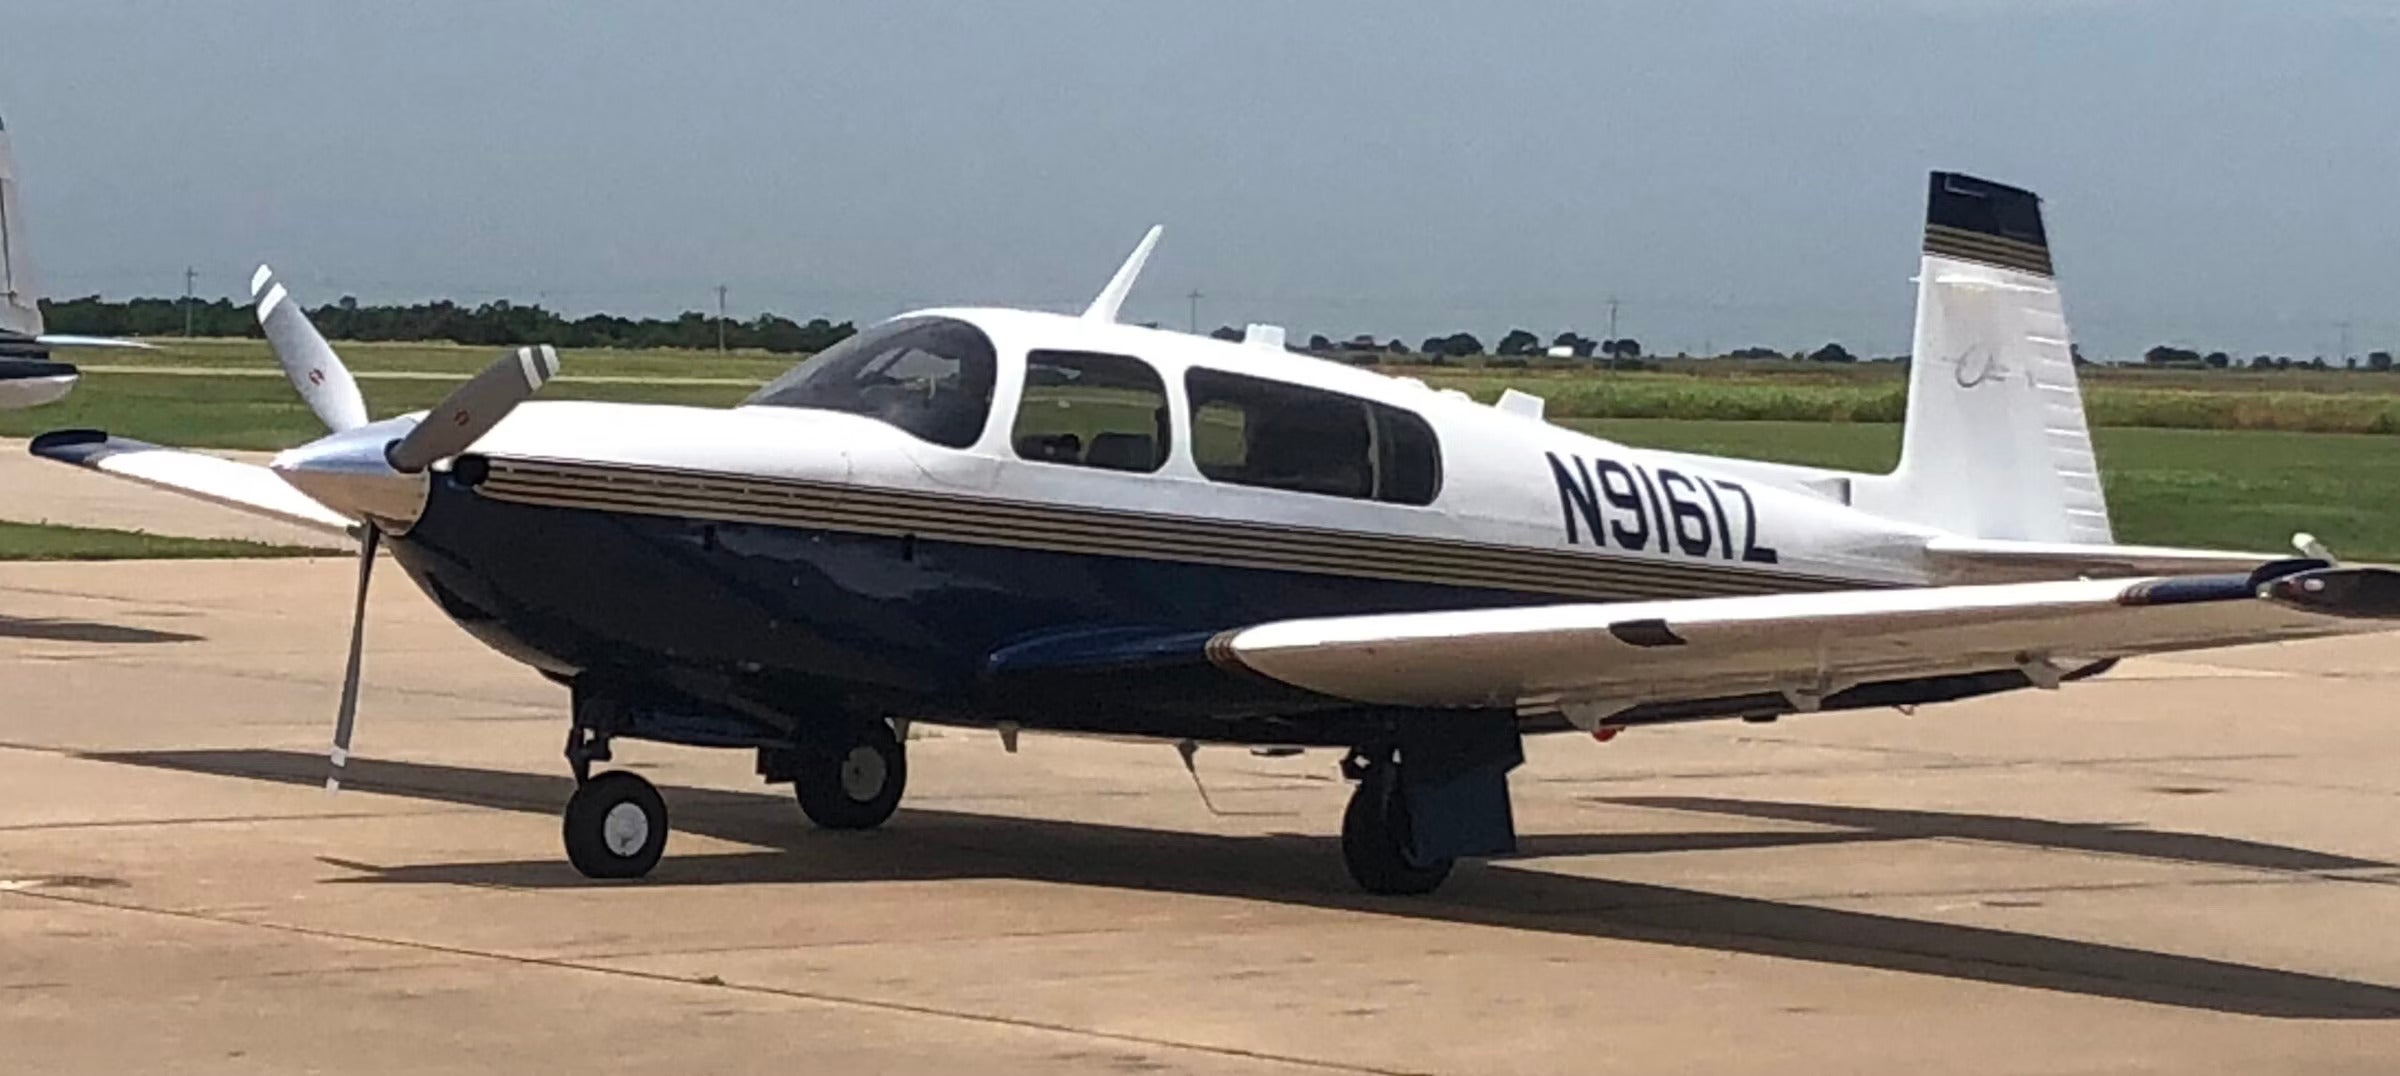 This 1995 Mooney M20R Ovation Is a Powerful, Slippery, and Speedy ‘AircraftForSale’ Top Pick